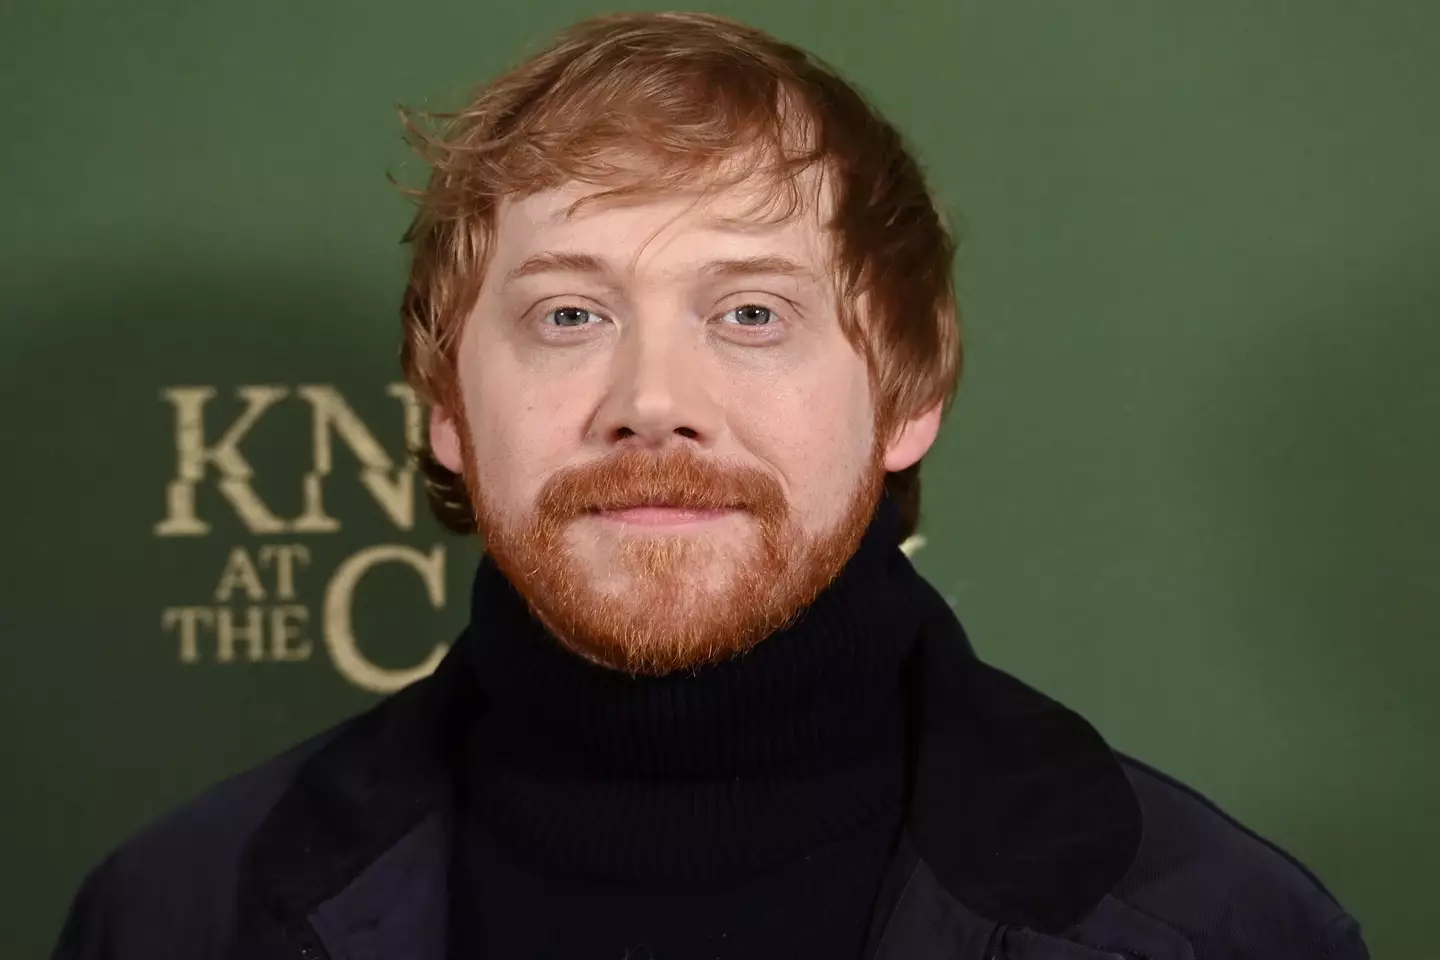 Rupert Grint said he sees Rowling as his 'auntie'. (Dave J Hogan/Getty Images)